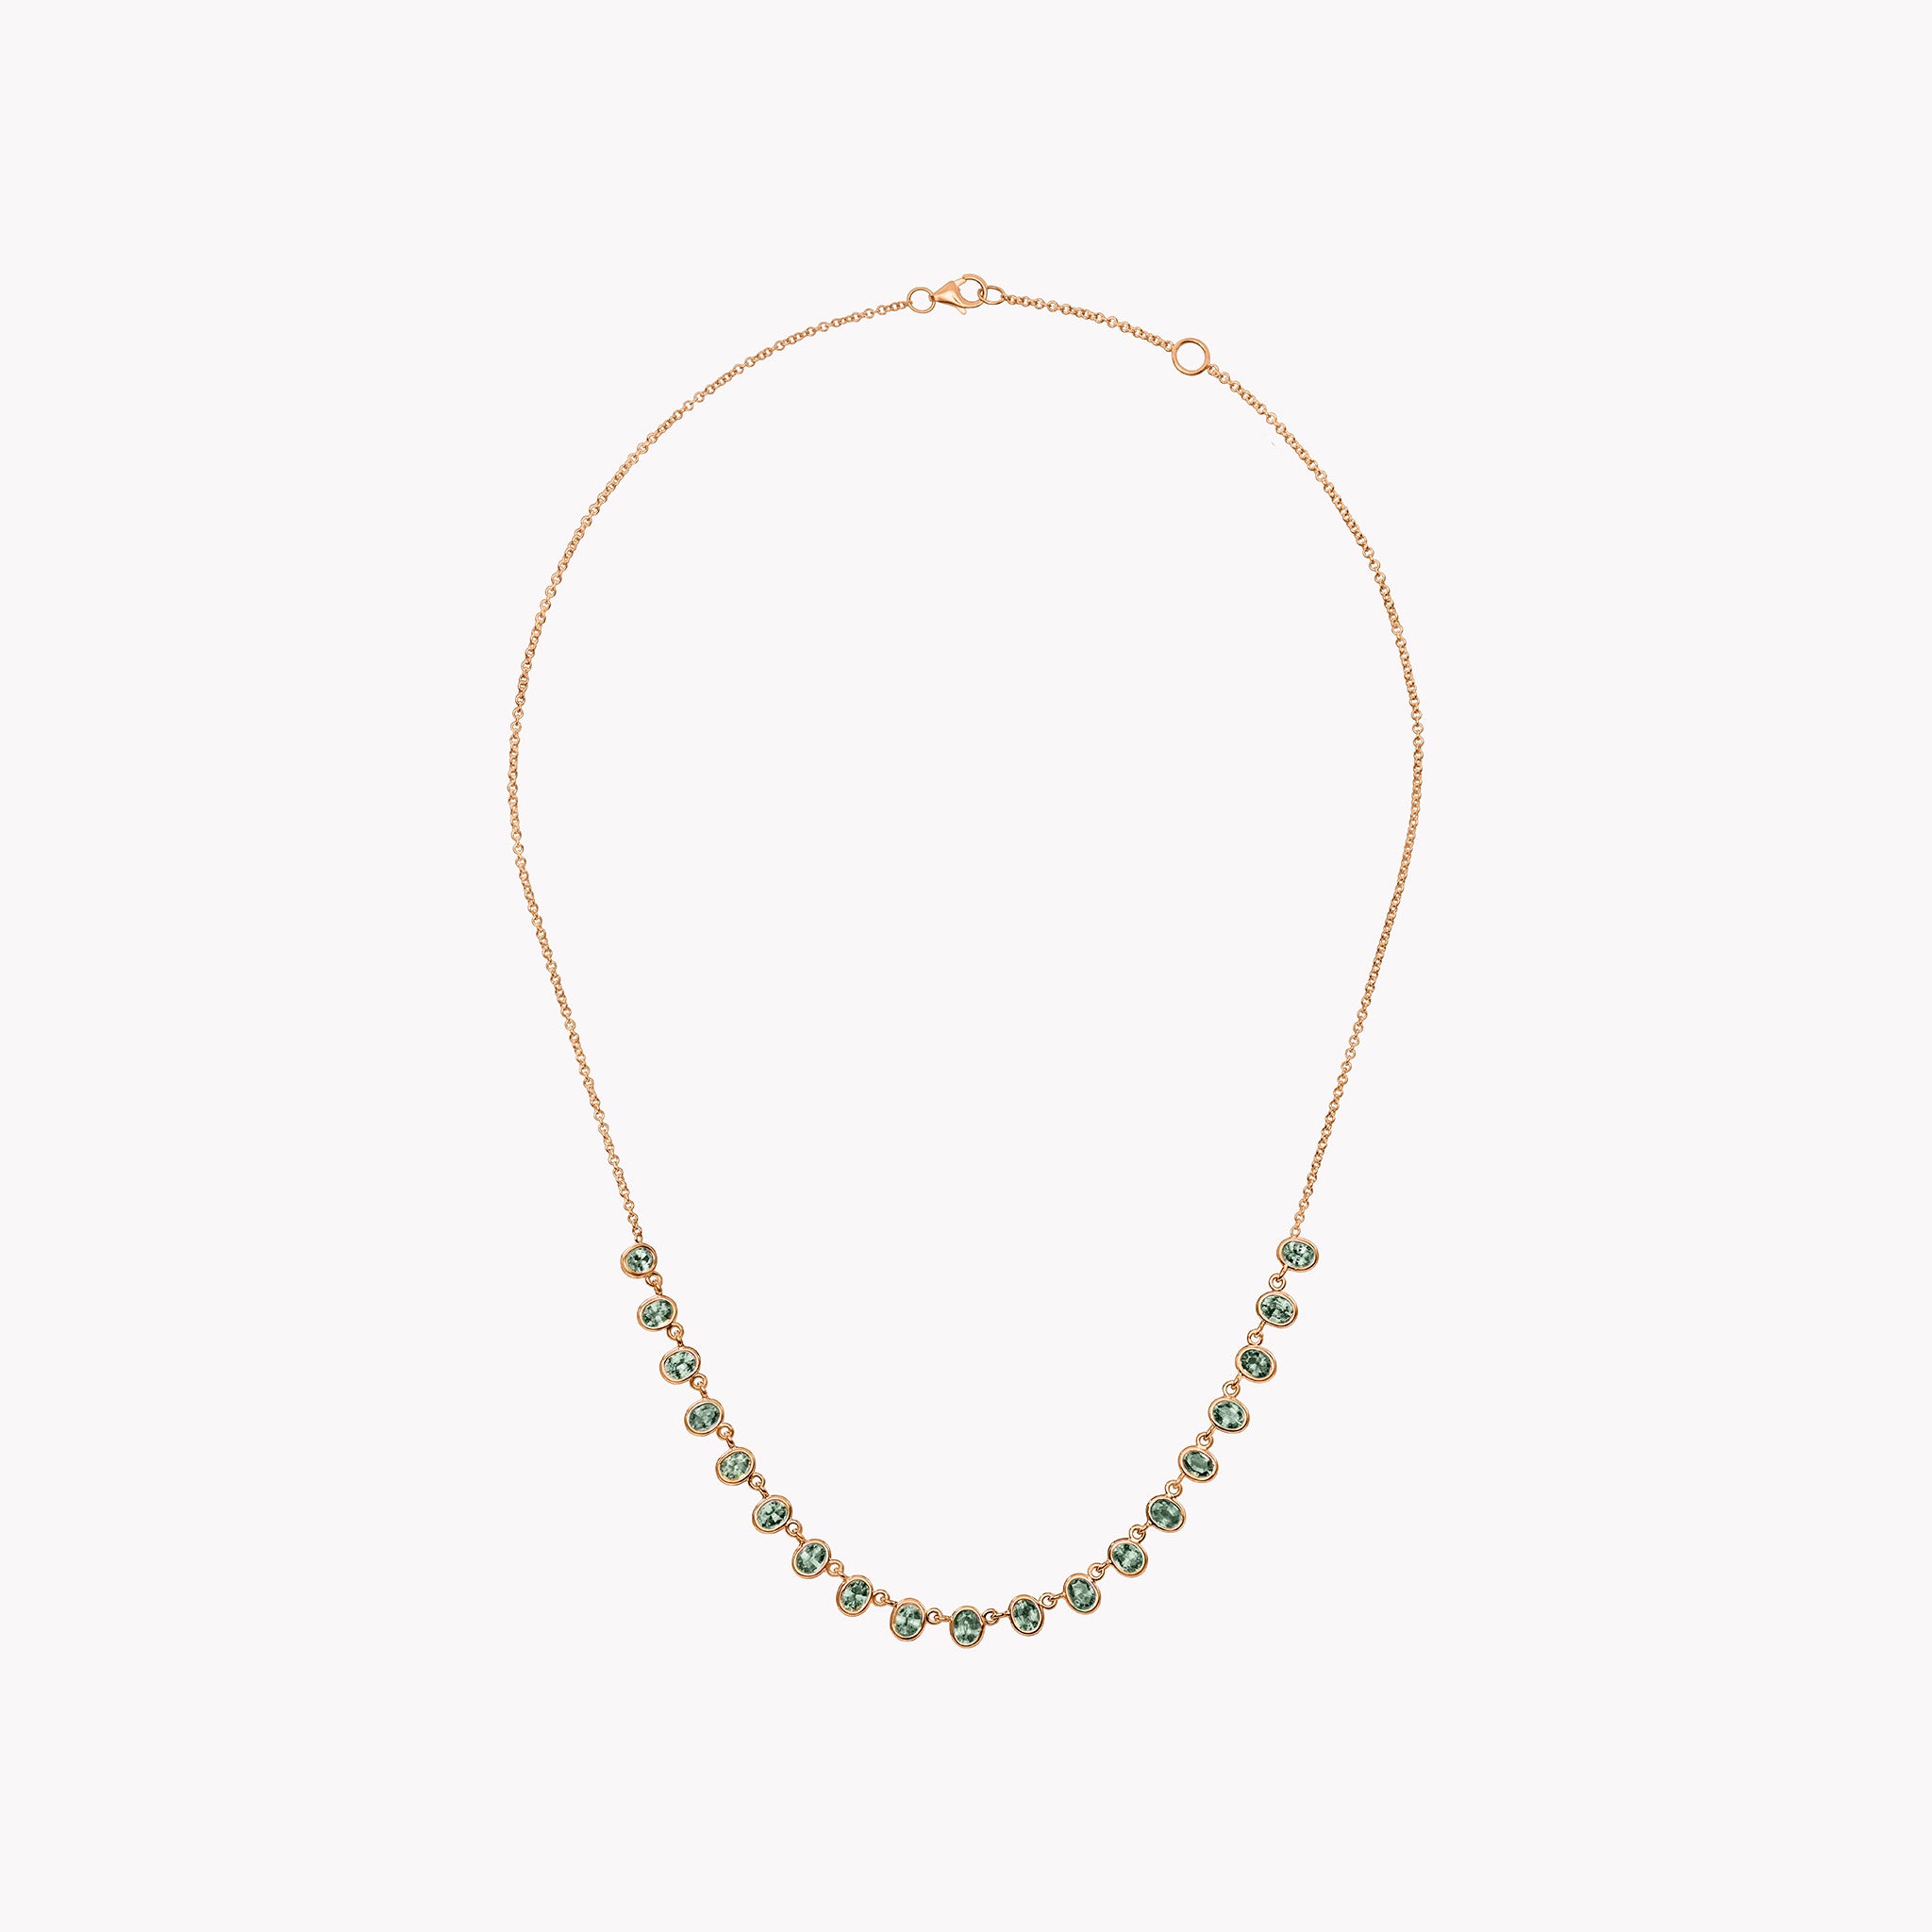 The Petite Lena Green Sapphire Necklace